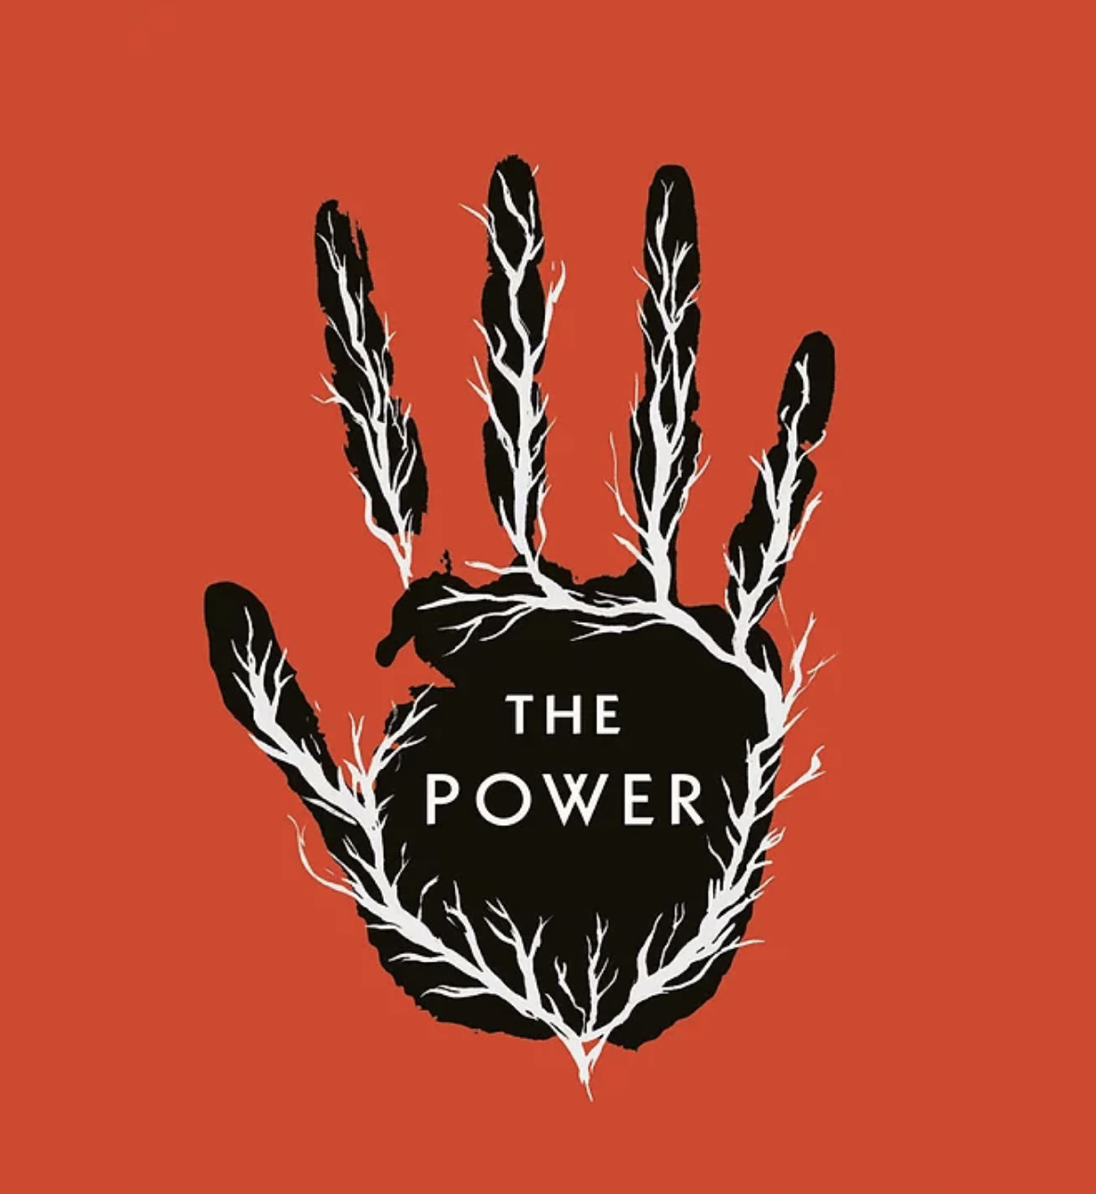 'The Power' coming soon!